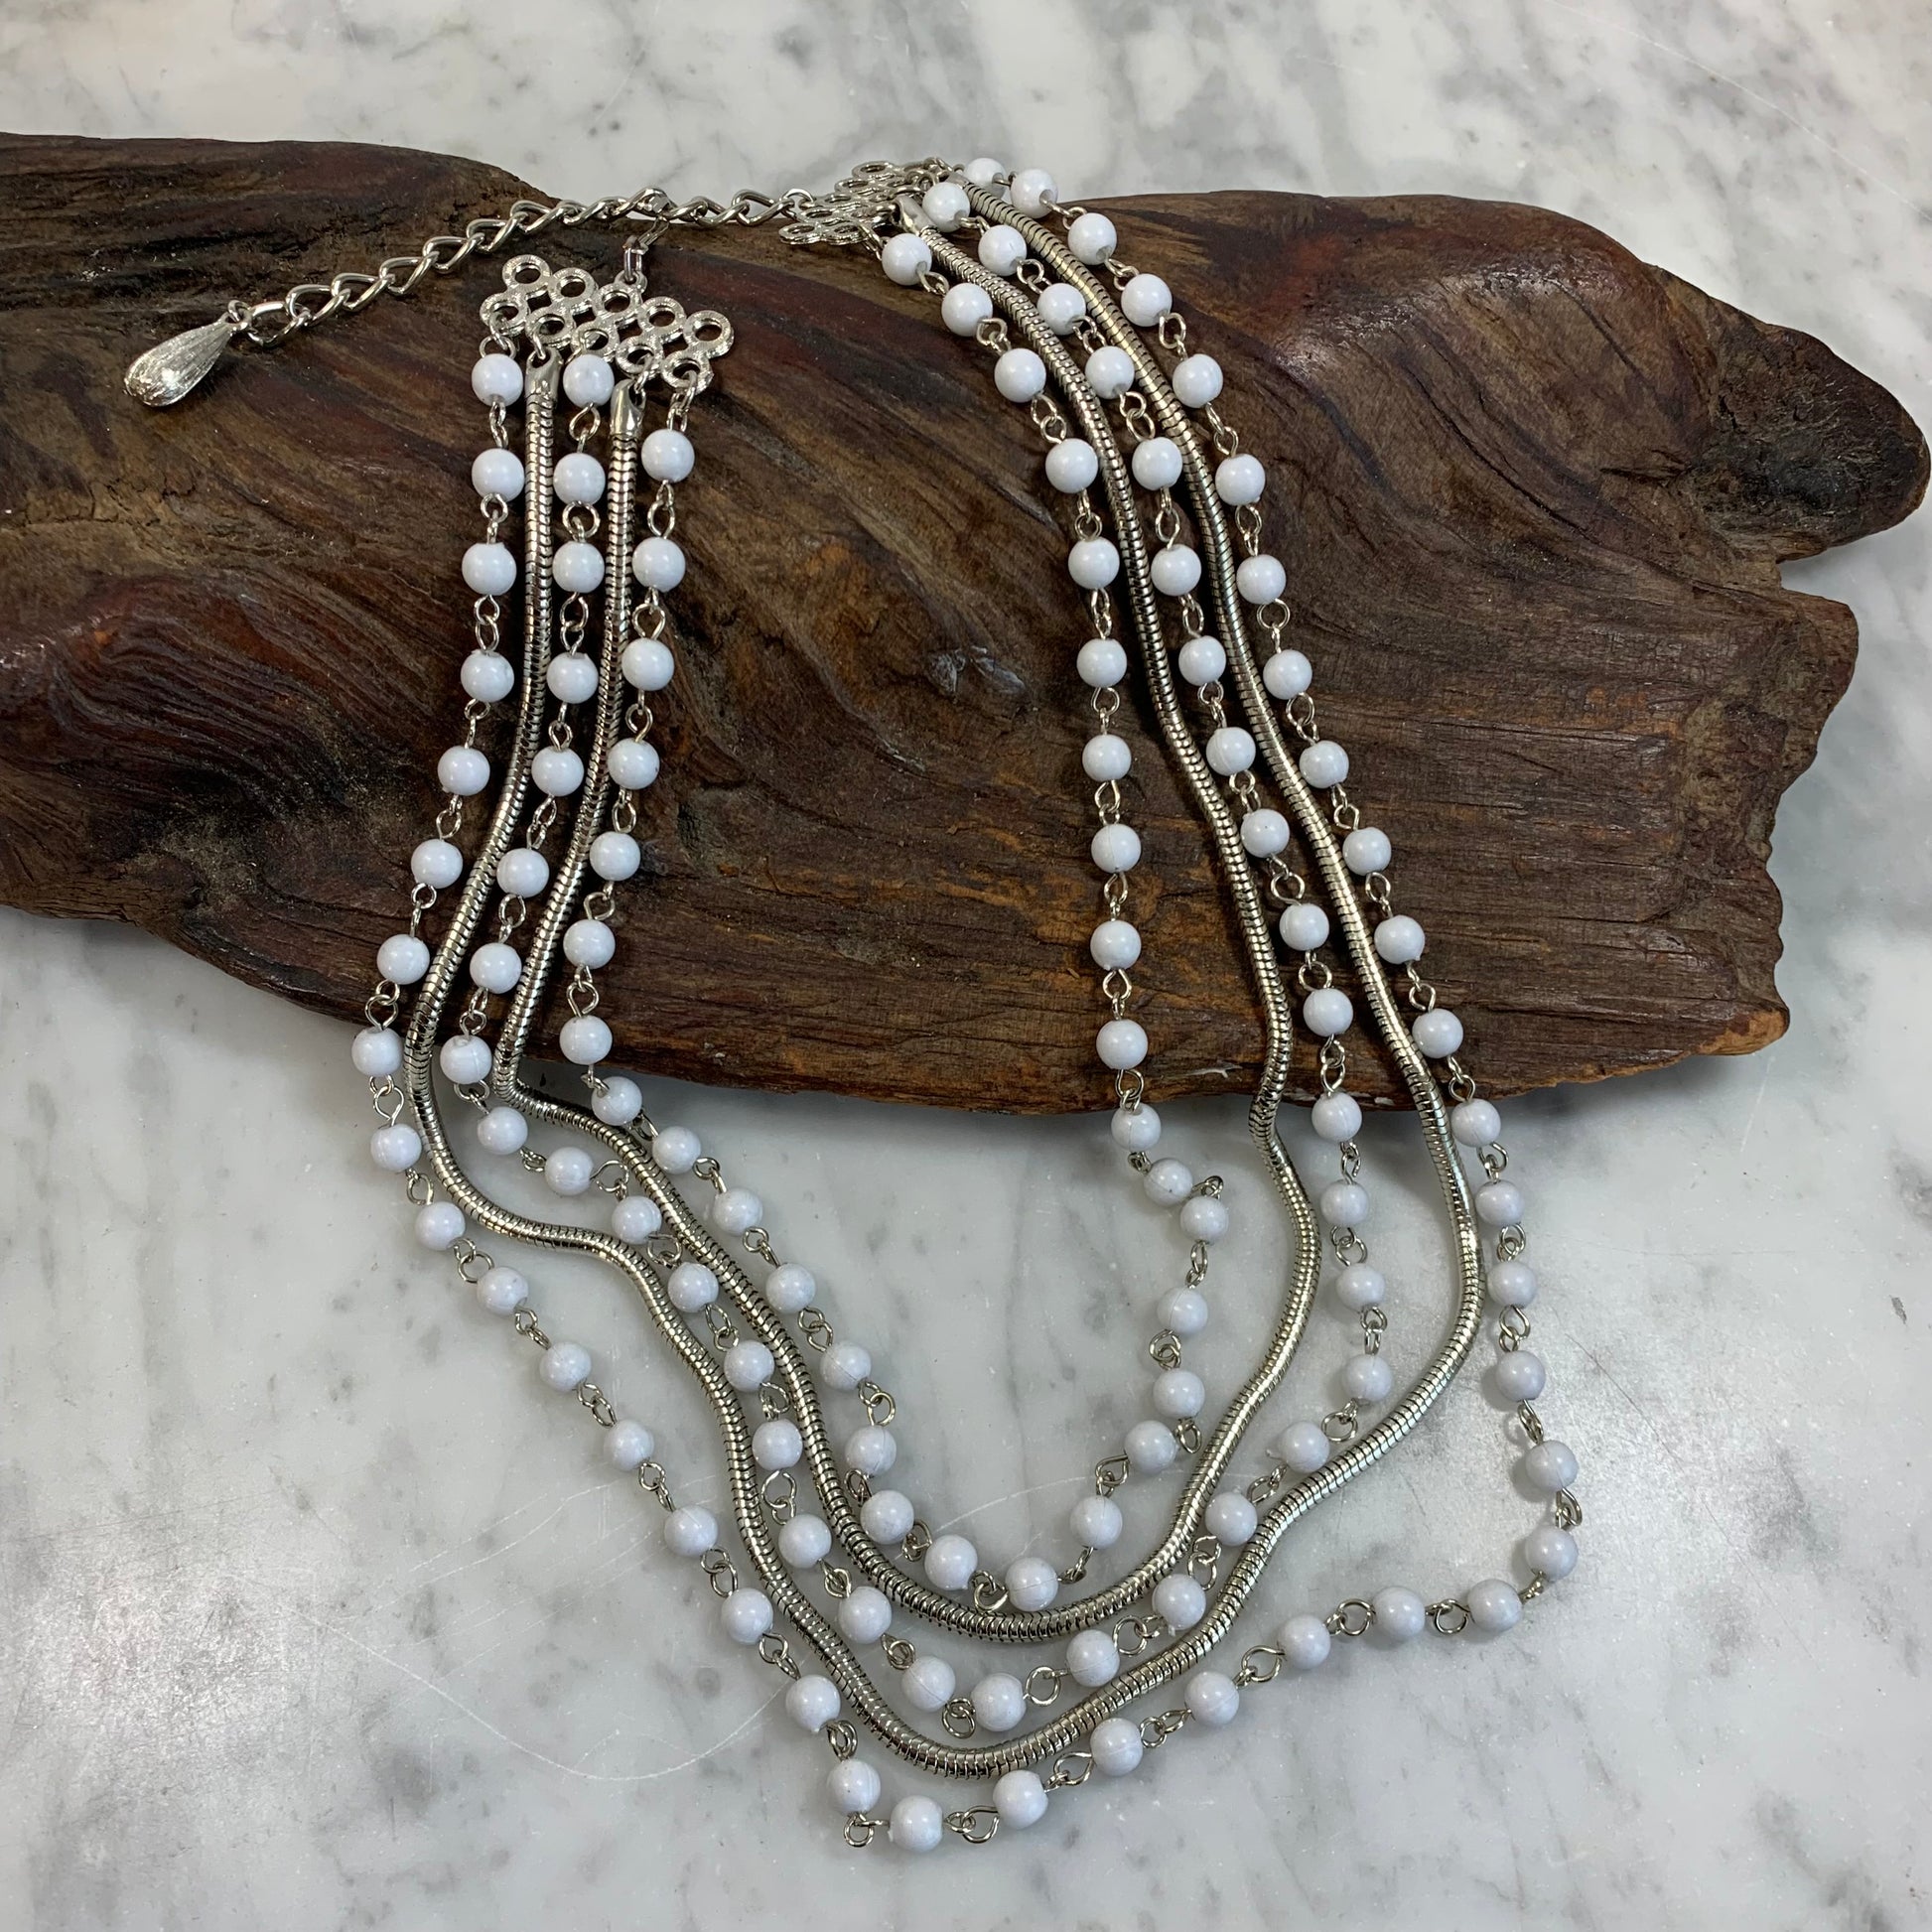 Vintage Layered Multi  Strand White Bead & Silver Tone Snake Chain Necklace.